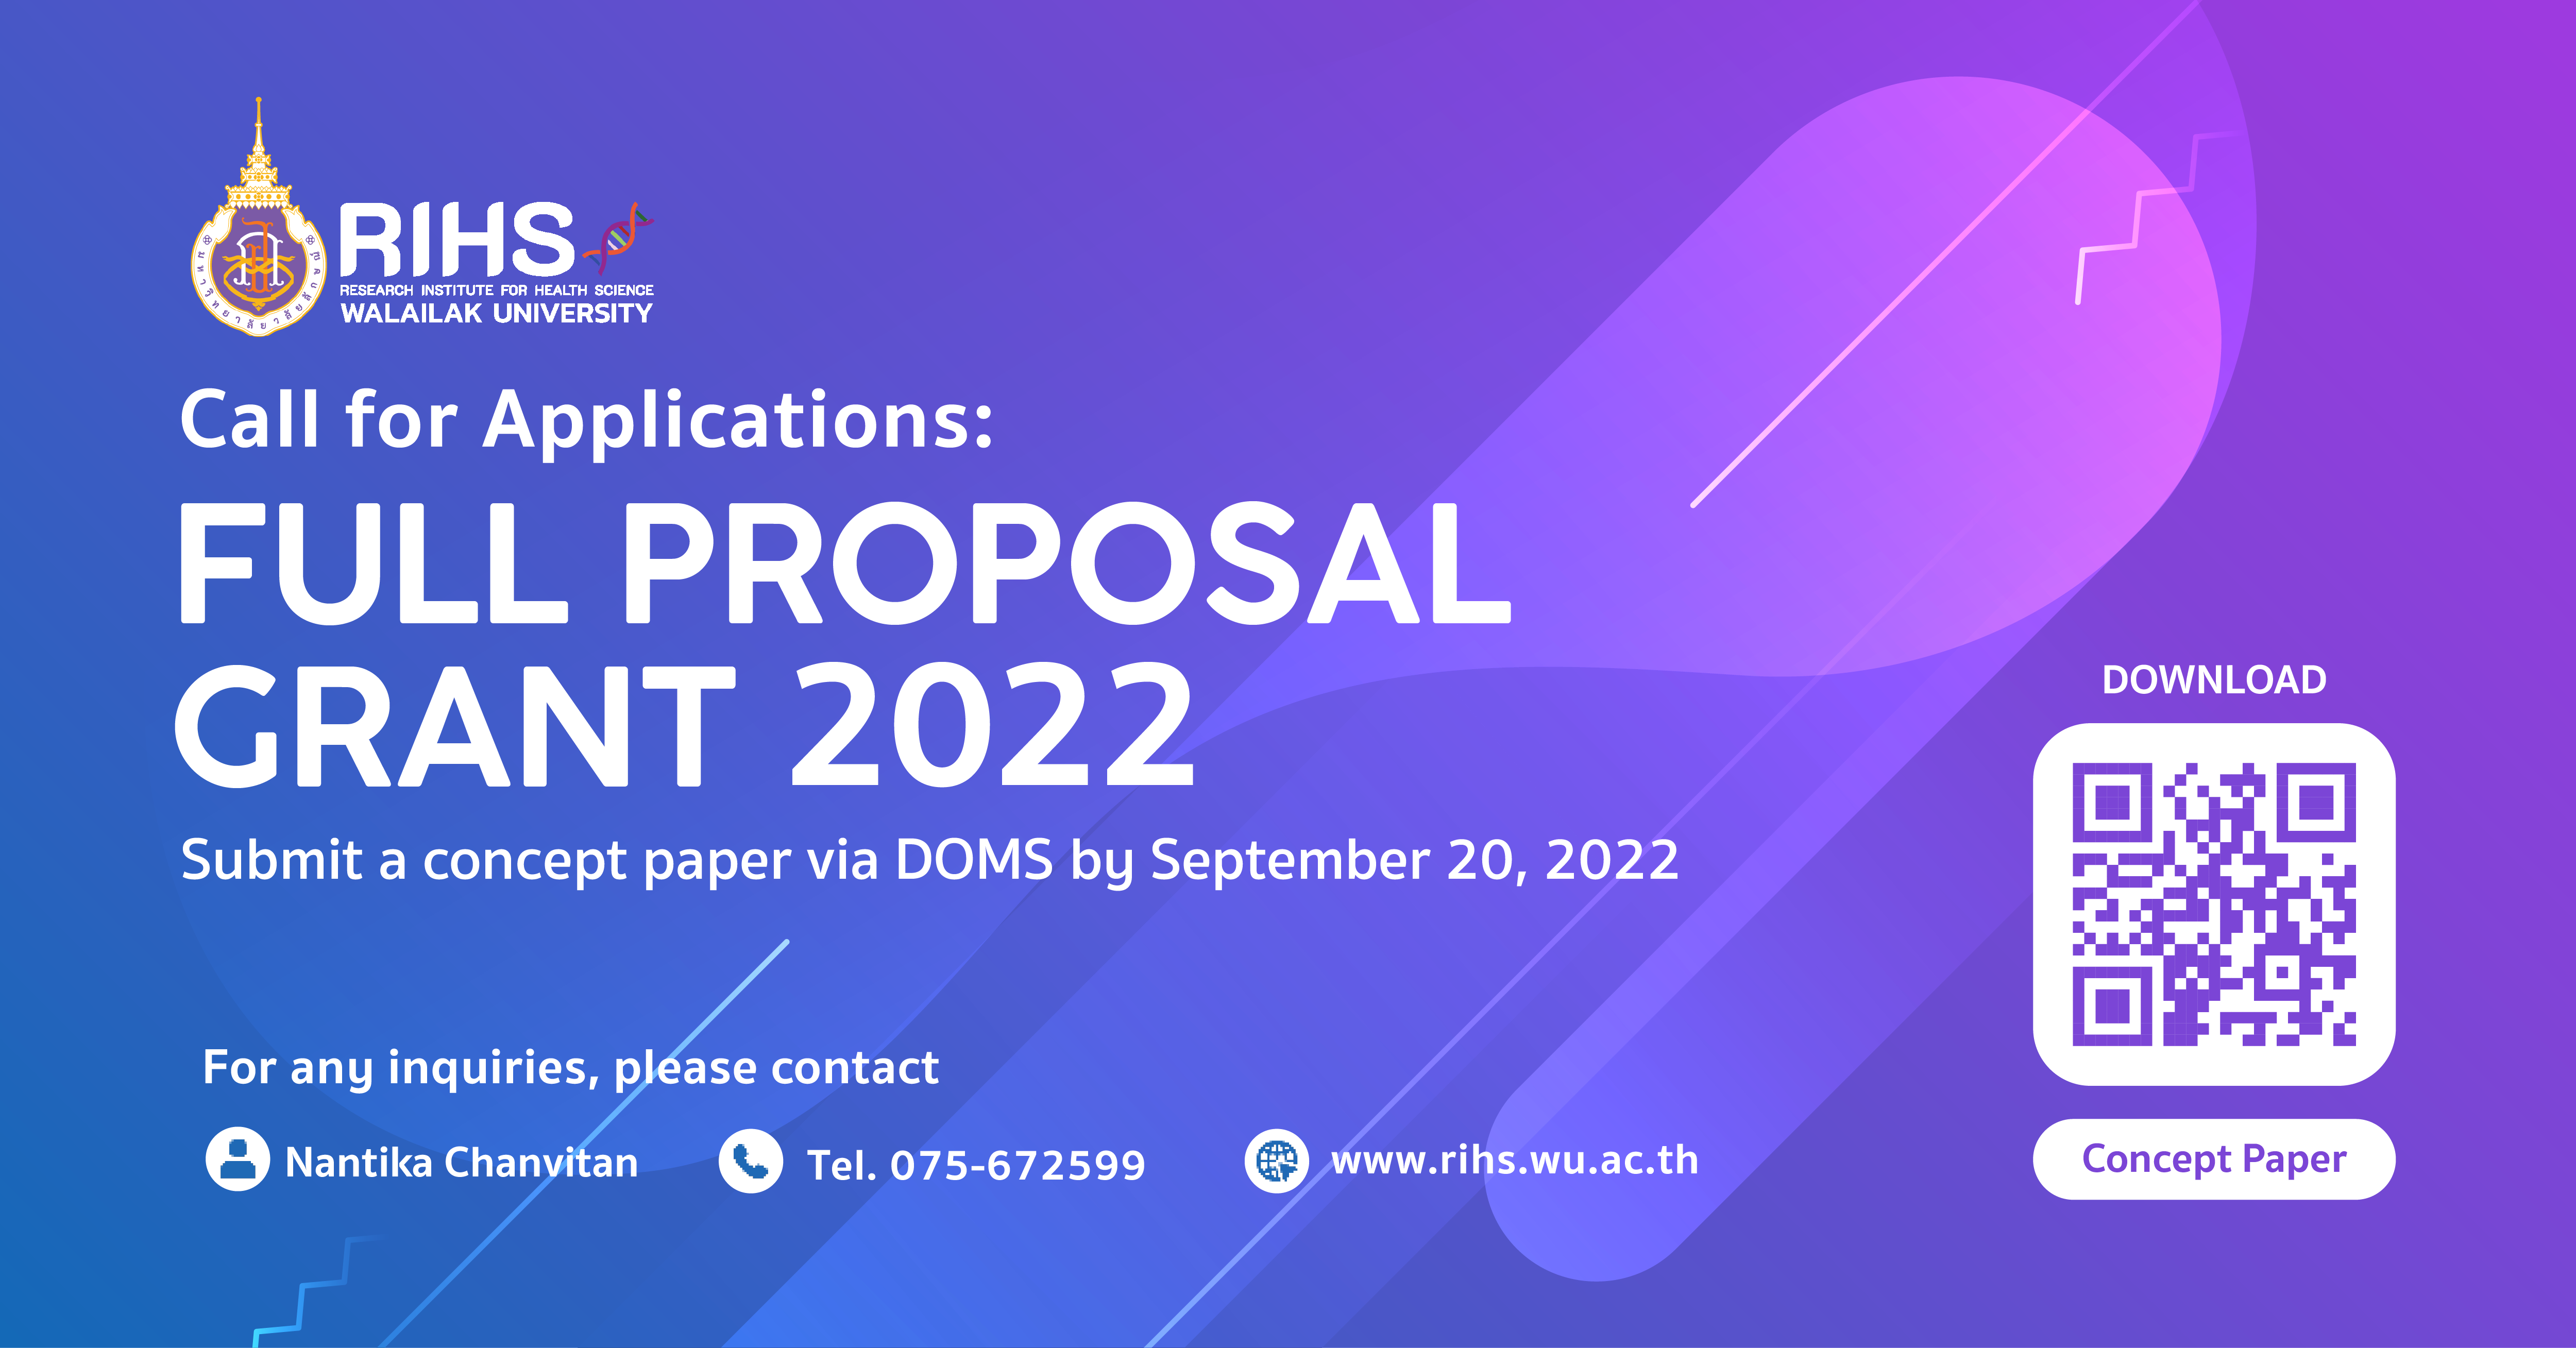 Now Open: Calling for Full Proposal Grant Applications 2022